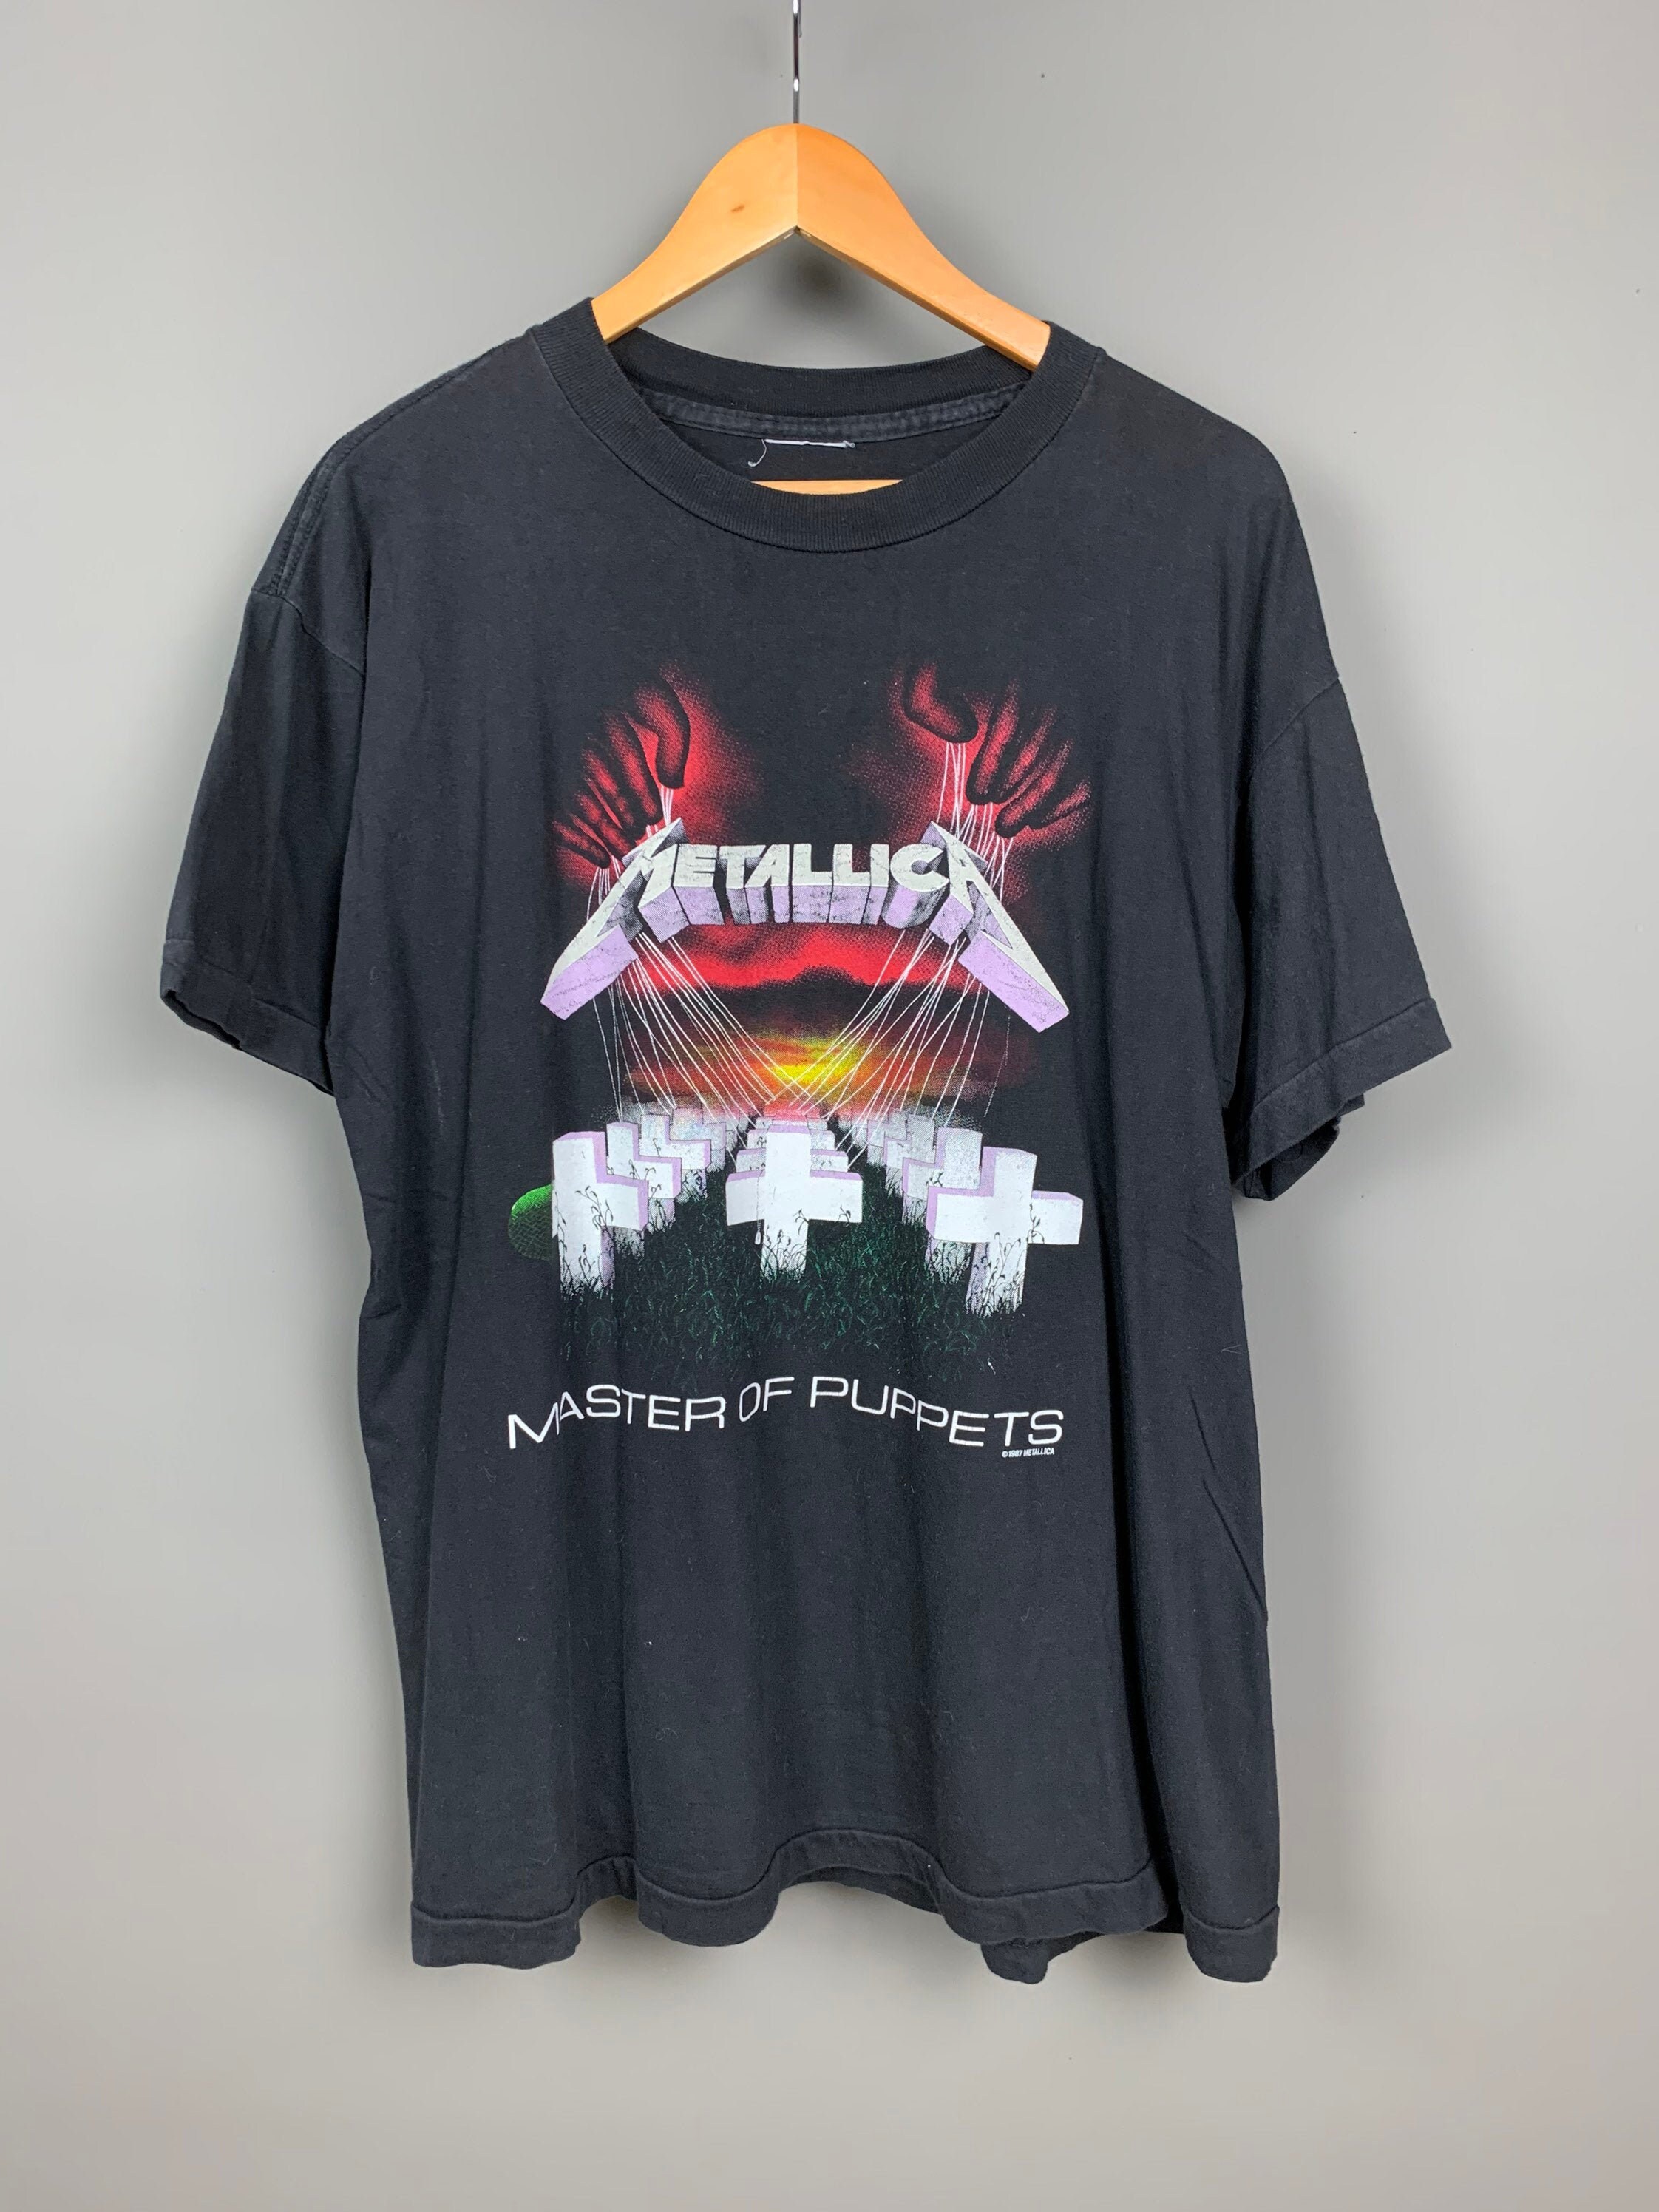 METALLICA 1987 MASTER of PUPPETS Band T-shirt / - Etsy